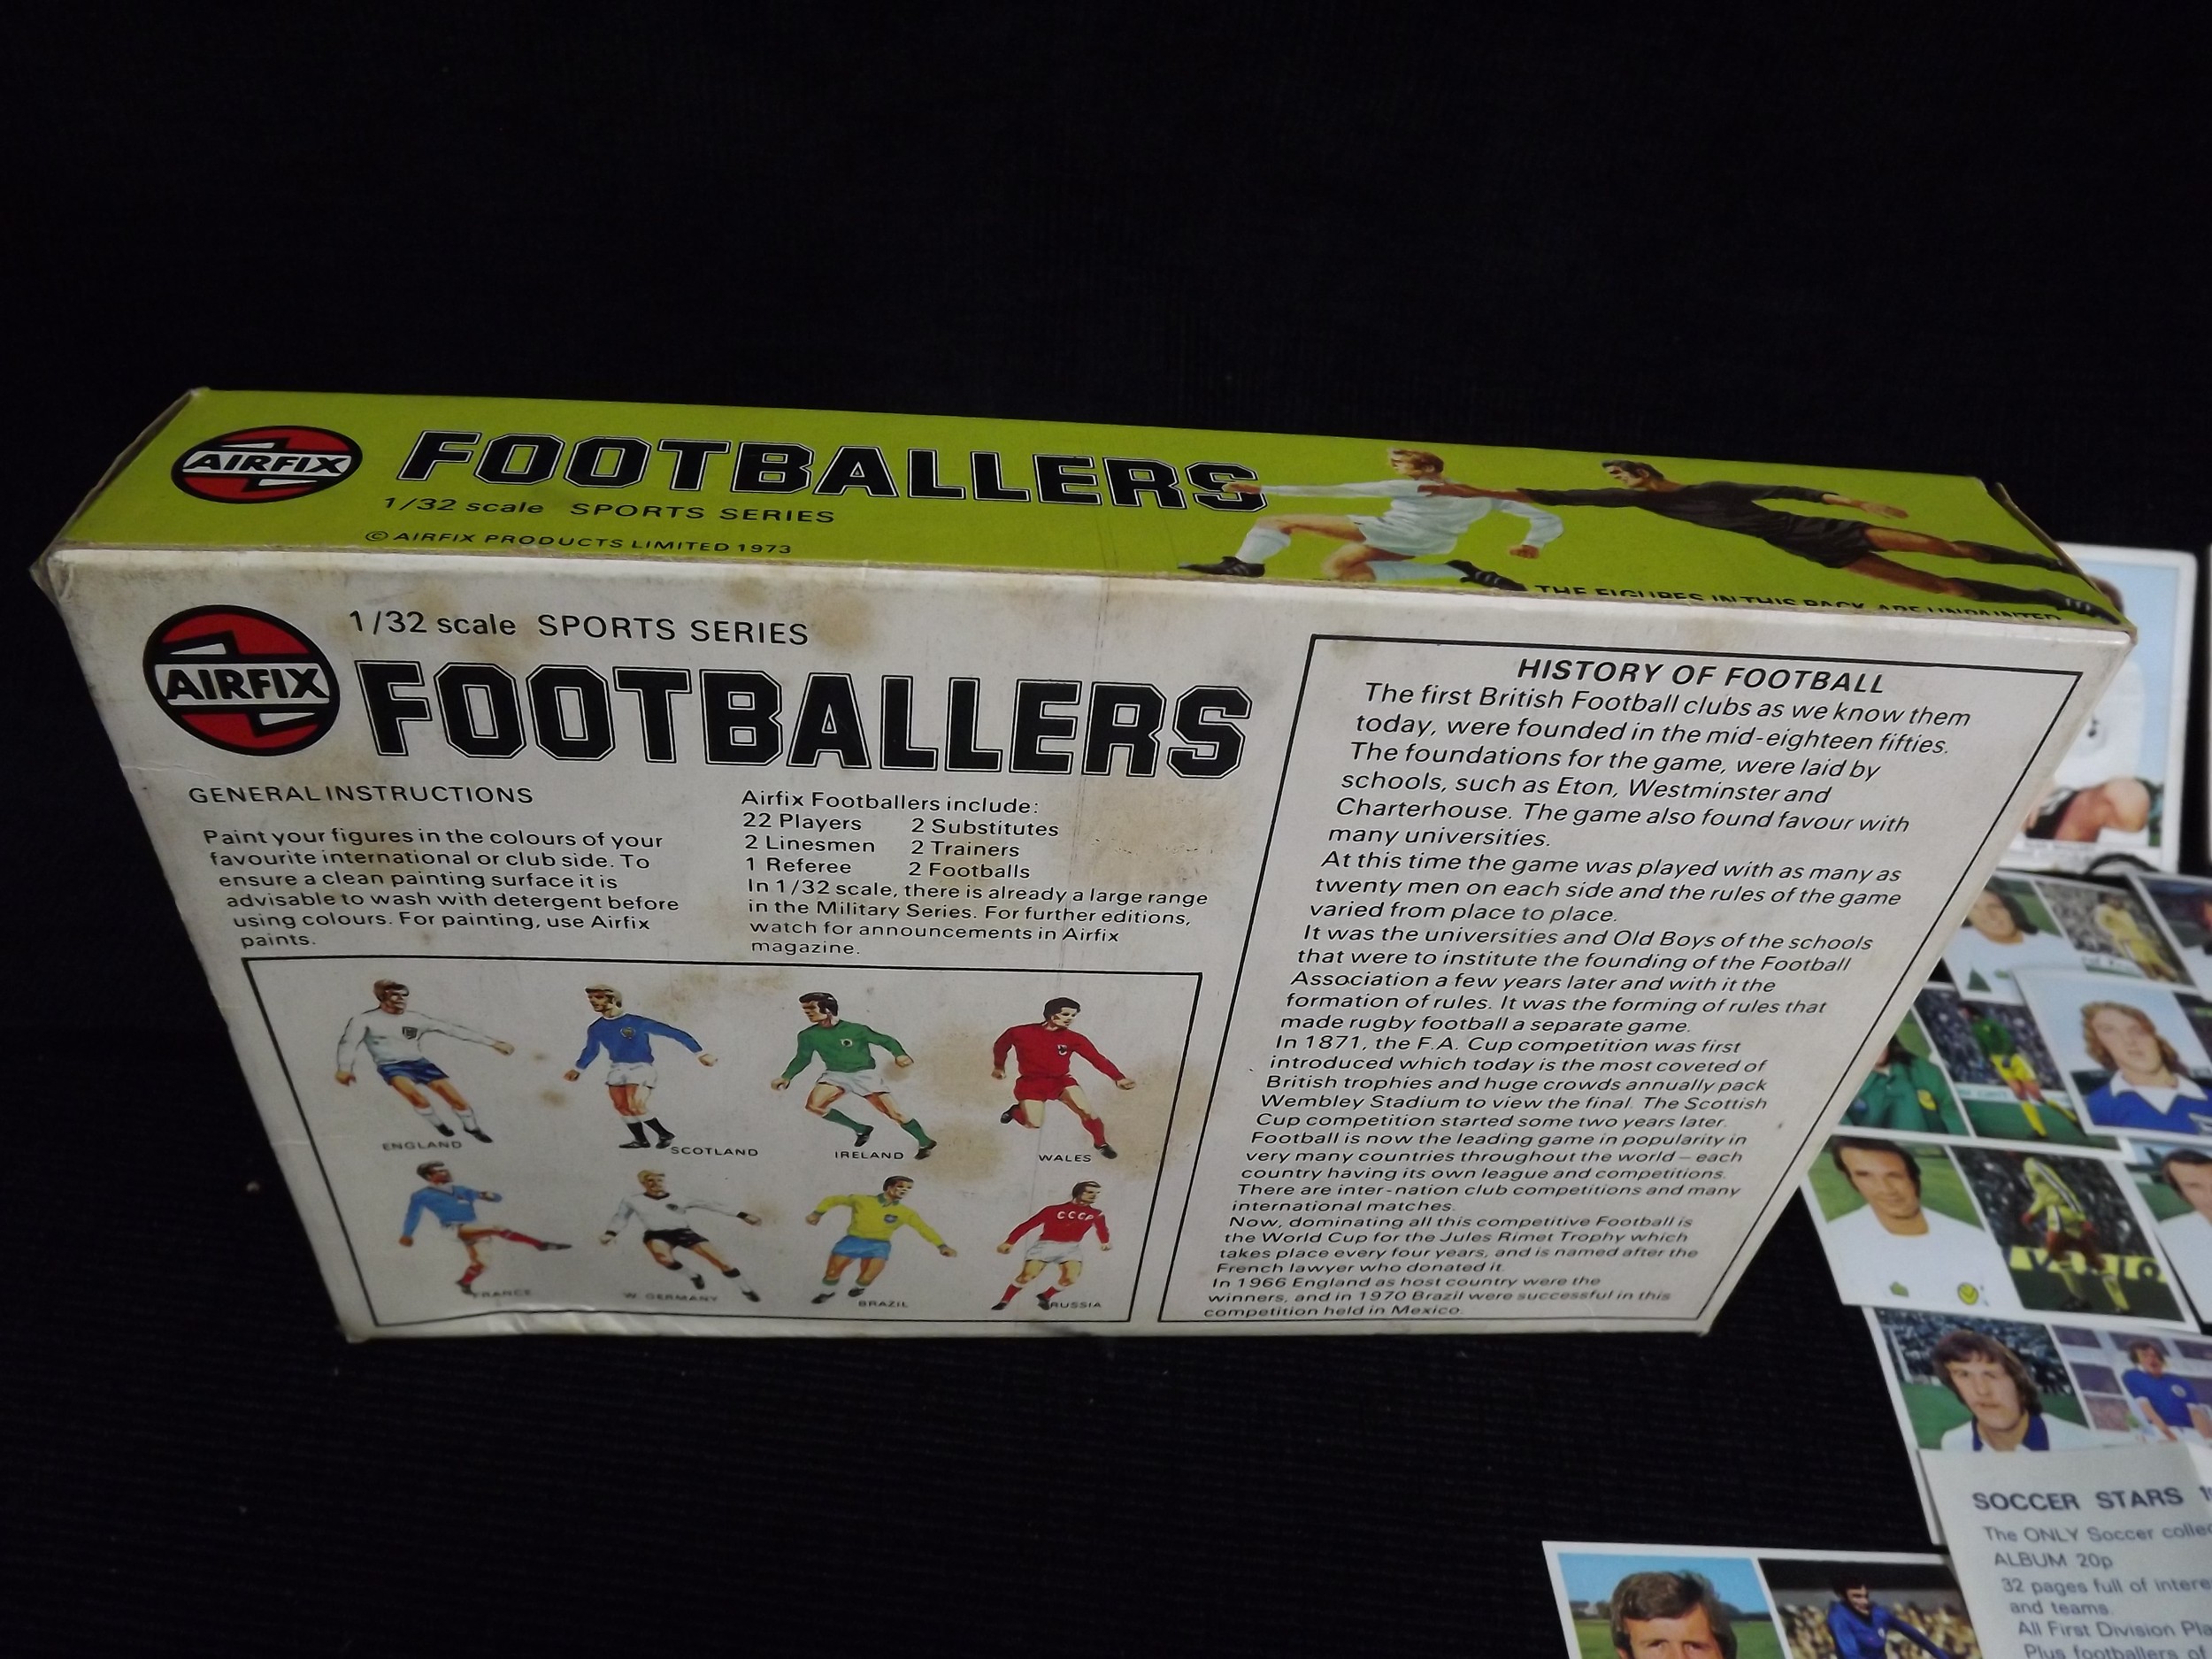 Football Collectors Items. Airfix 51470-3 'Footballers' 1/32 Scale Sports Series(all 29 figures - Image 8 of 9